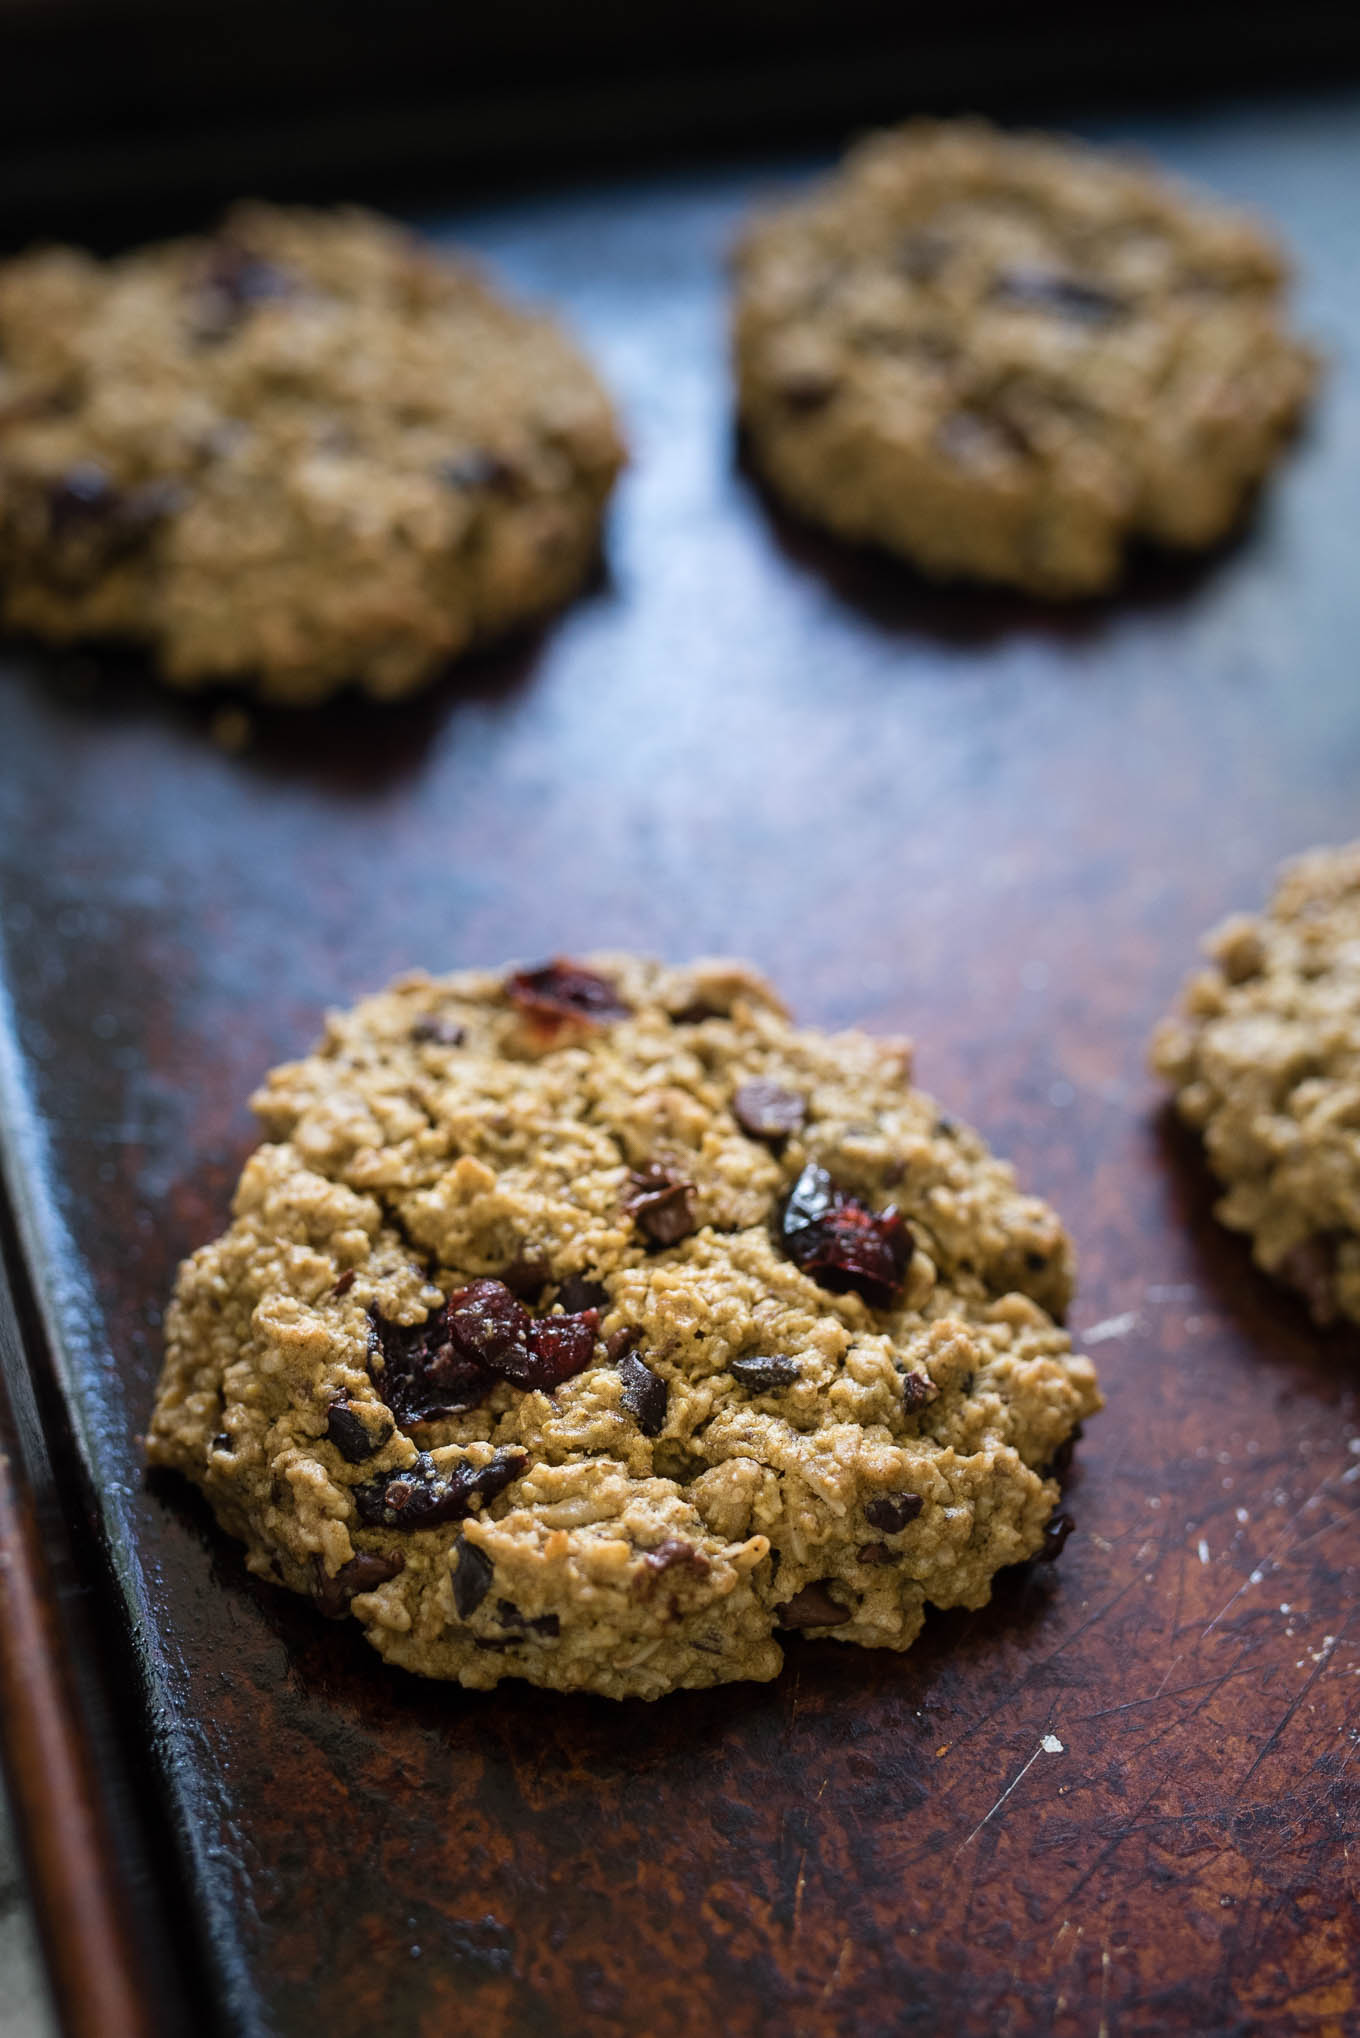 Lunch Box Cookies are both nutritious and delicious- a hearty soft cookie packed with oats, chocolate chips, cranberries, cocoa nibs and reduced amounts of sugar and oil.